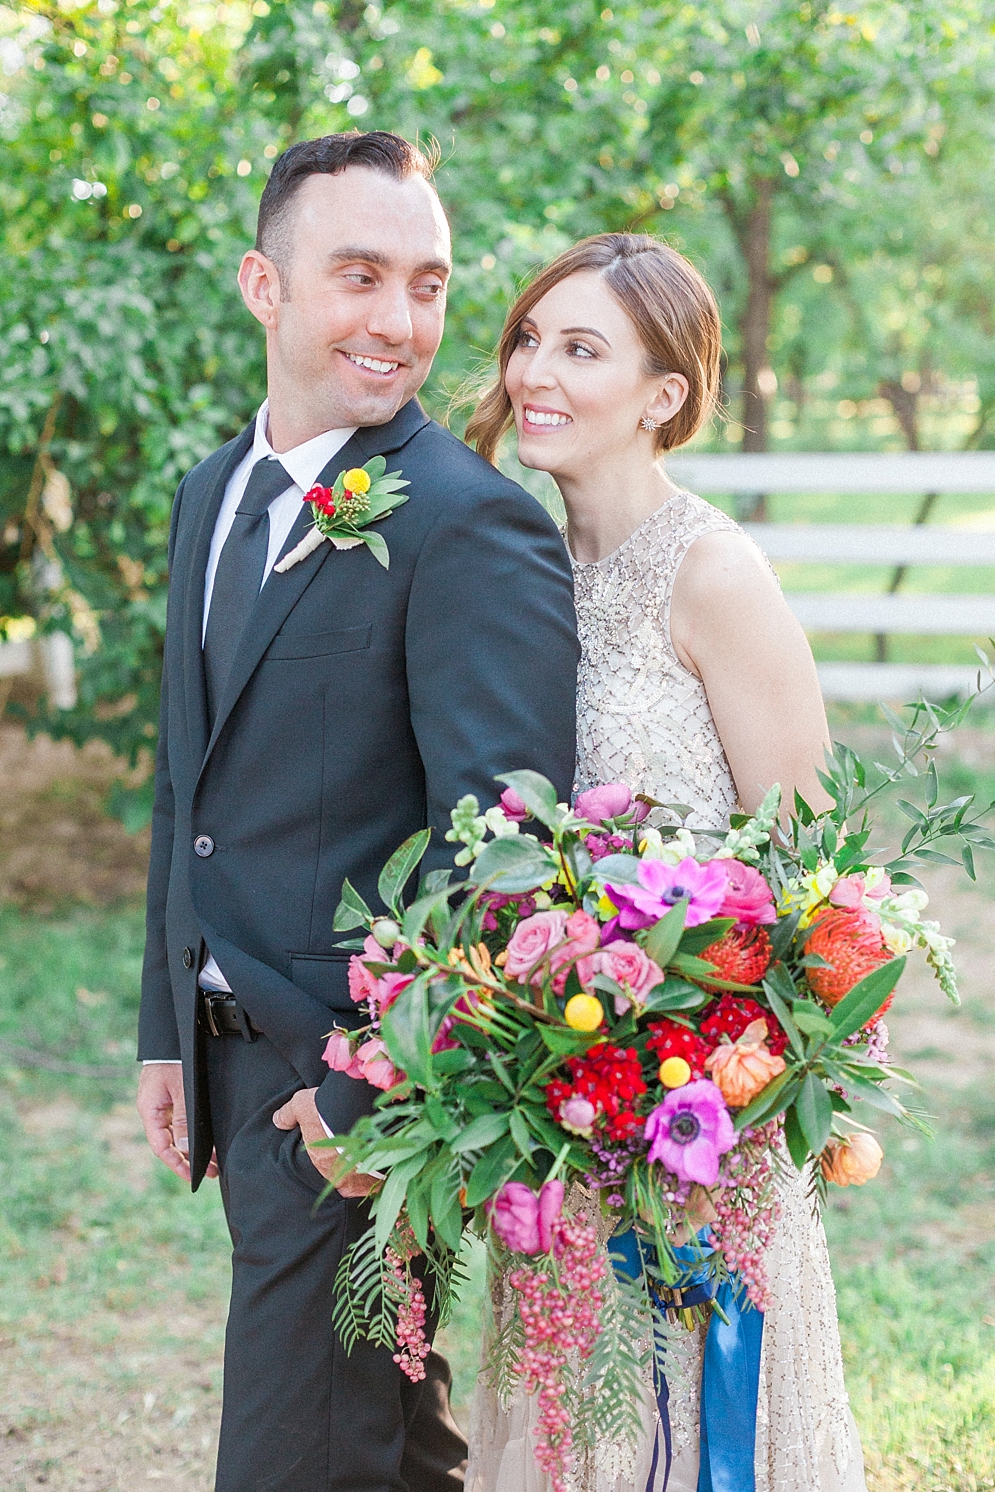 How to Protect Your Marriage - St. Louis Photographer | April Maura ...